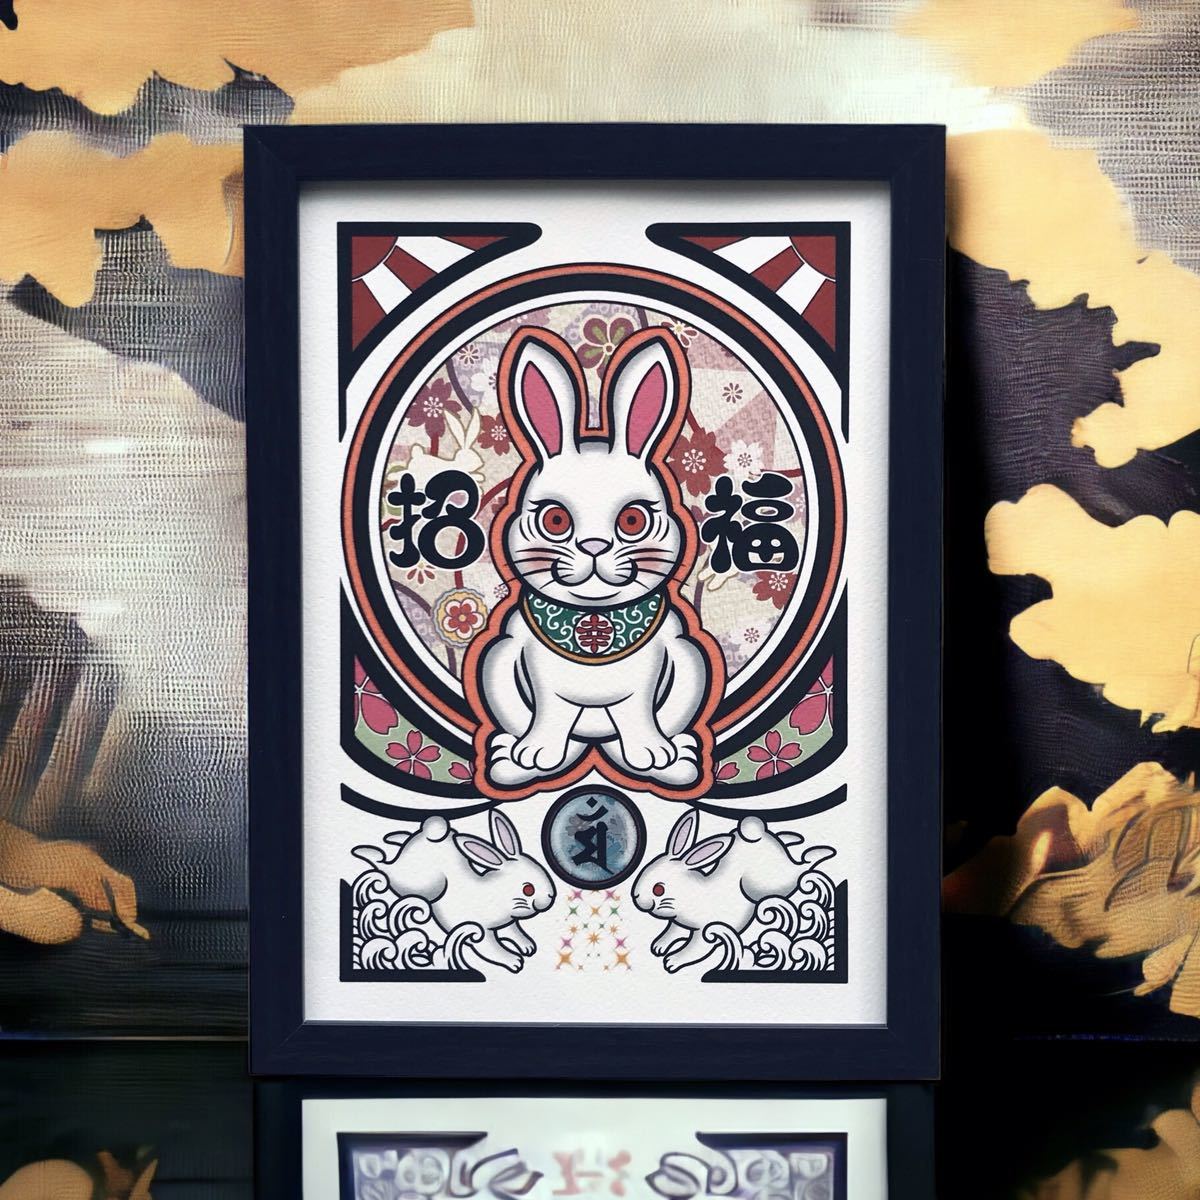 Lucky charm, good luck, prosperity in business, rabbit, illustration, Sanskrit characters, white rabbit, good luck, A4 size, framed, art, luck increase, amulet, Sanskrit characters, zodiac, year of the rabbit, good luck, prosperity in business, Handmade items, interior, miscellaneous goods, ornament, object